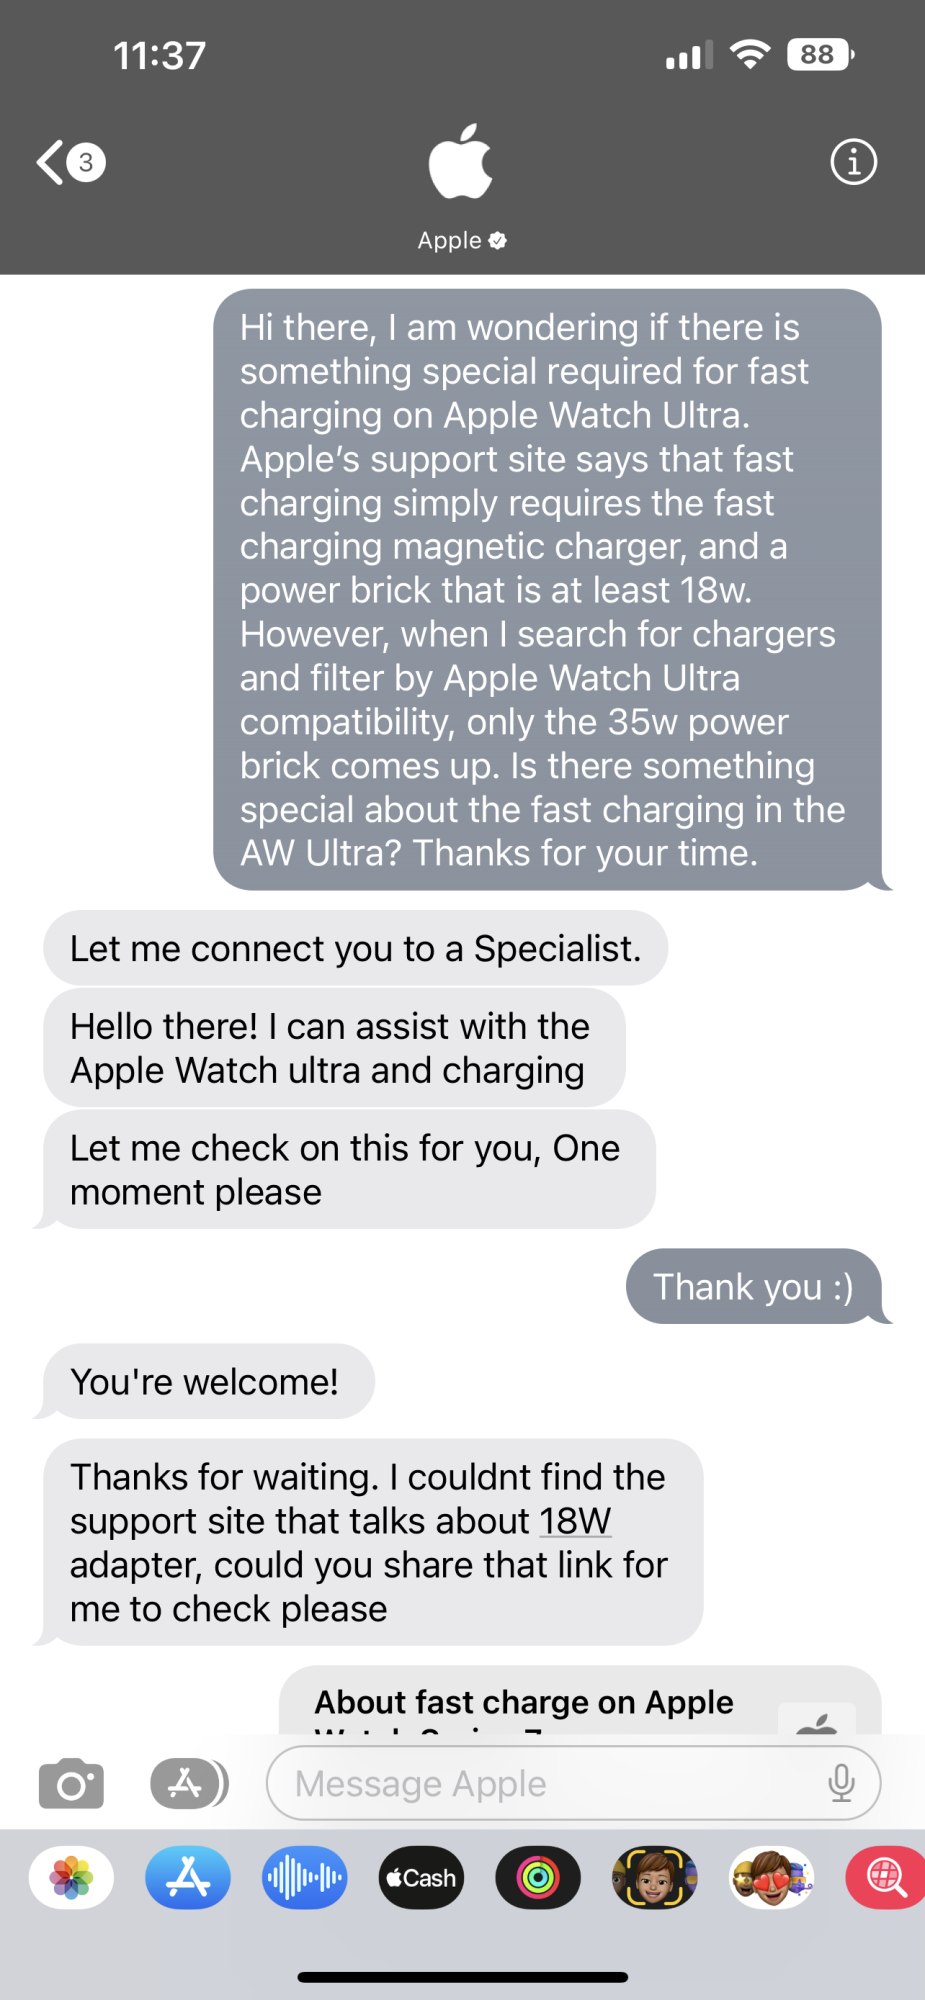 About fast charge on Apple Watch - Apple Support